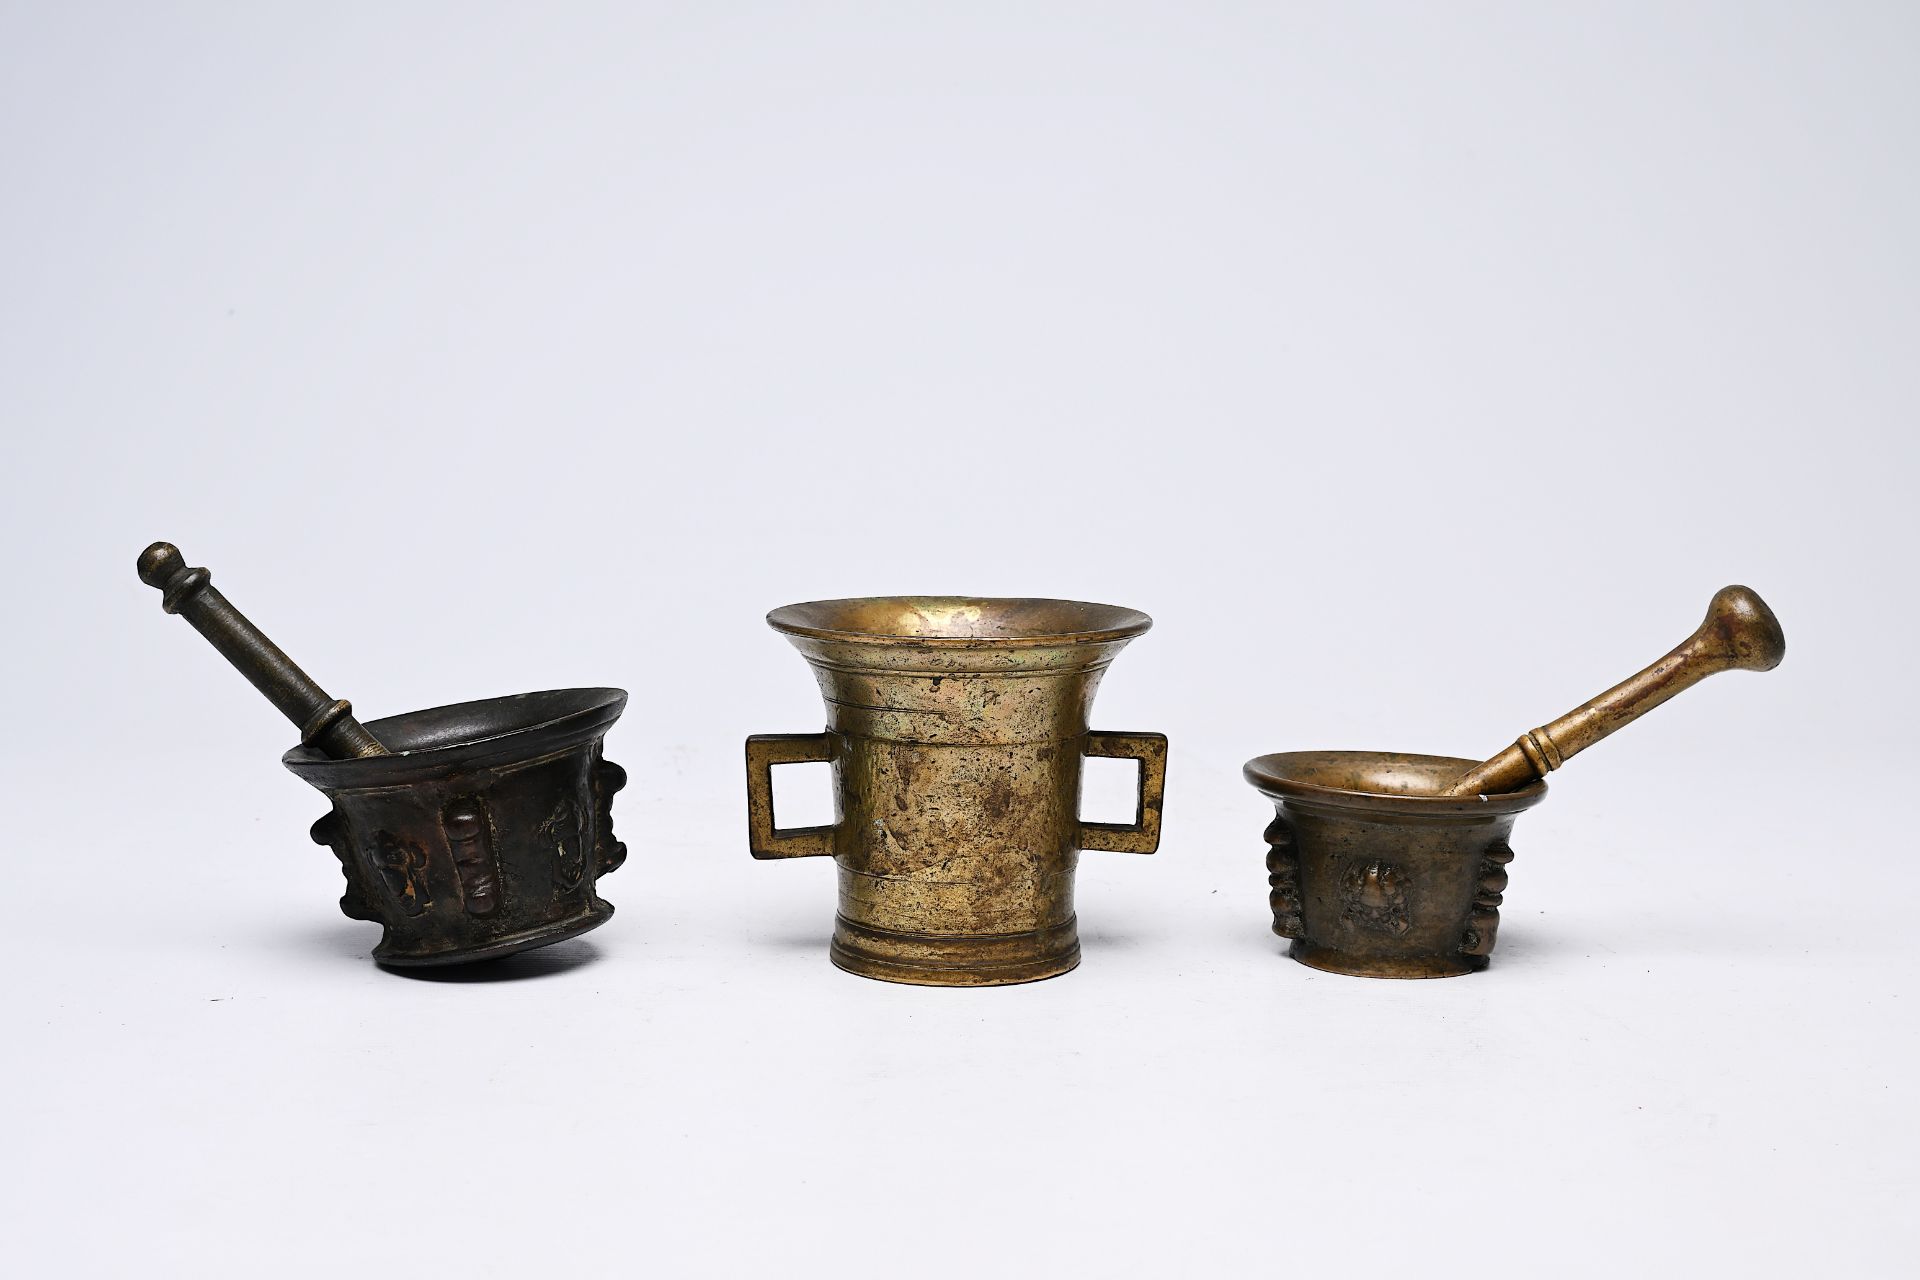 Three bronze mortars and two pestles, France and/or Spain, 16th/17th C.